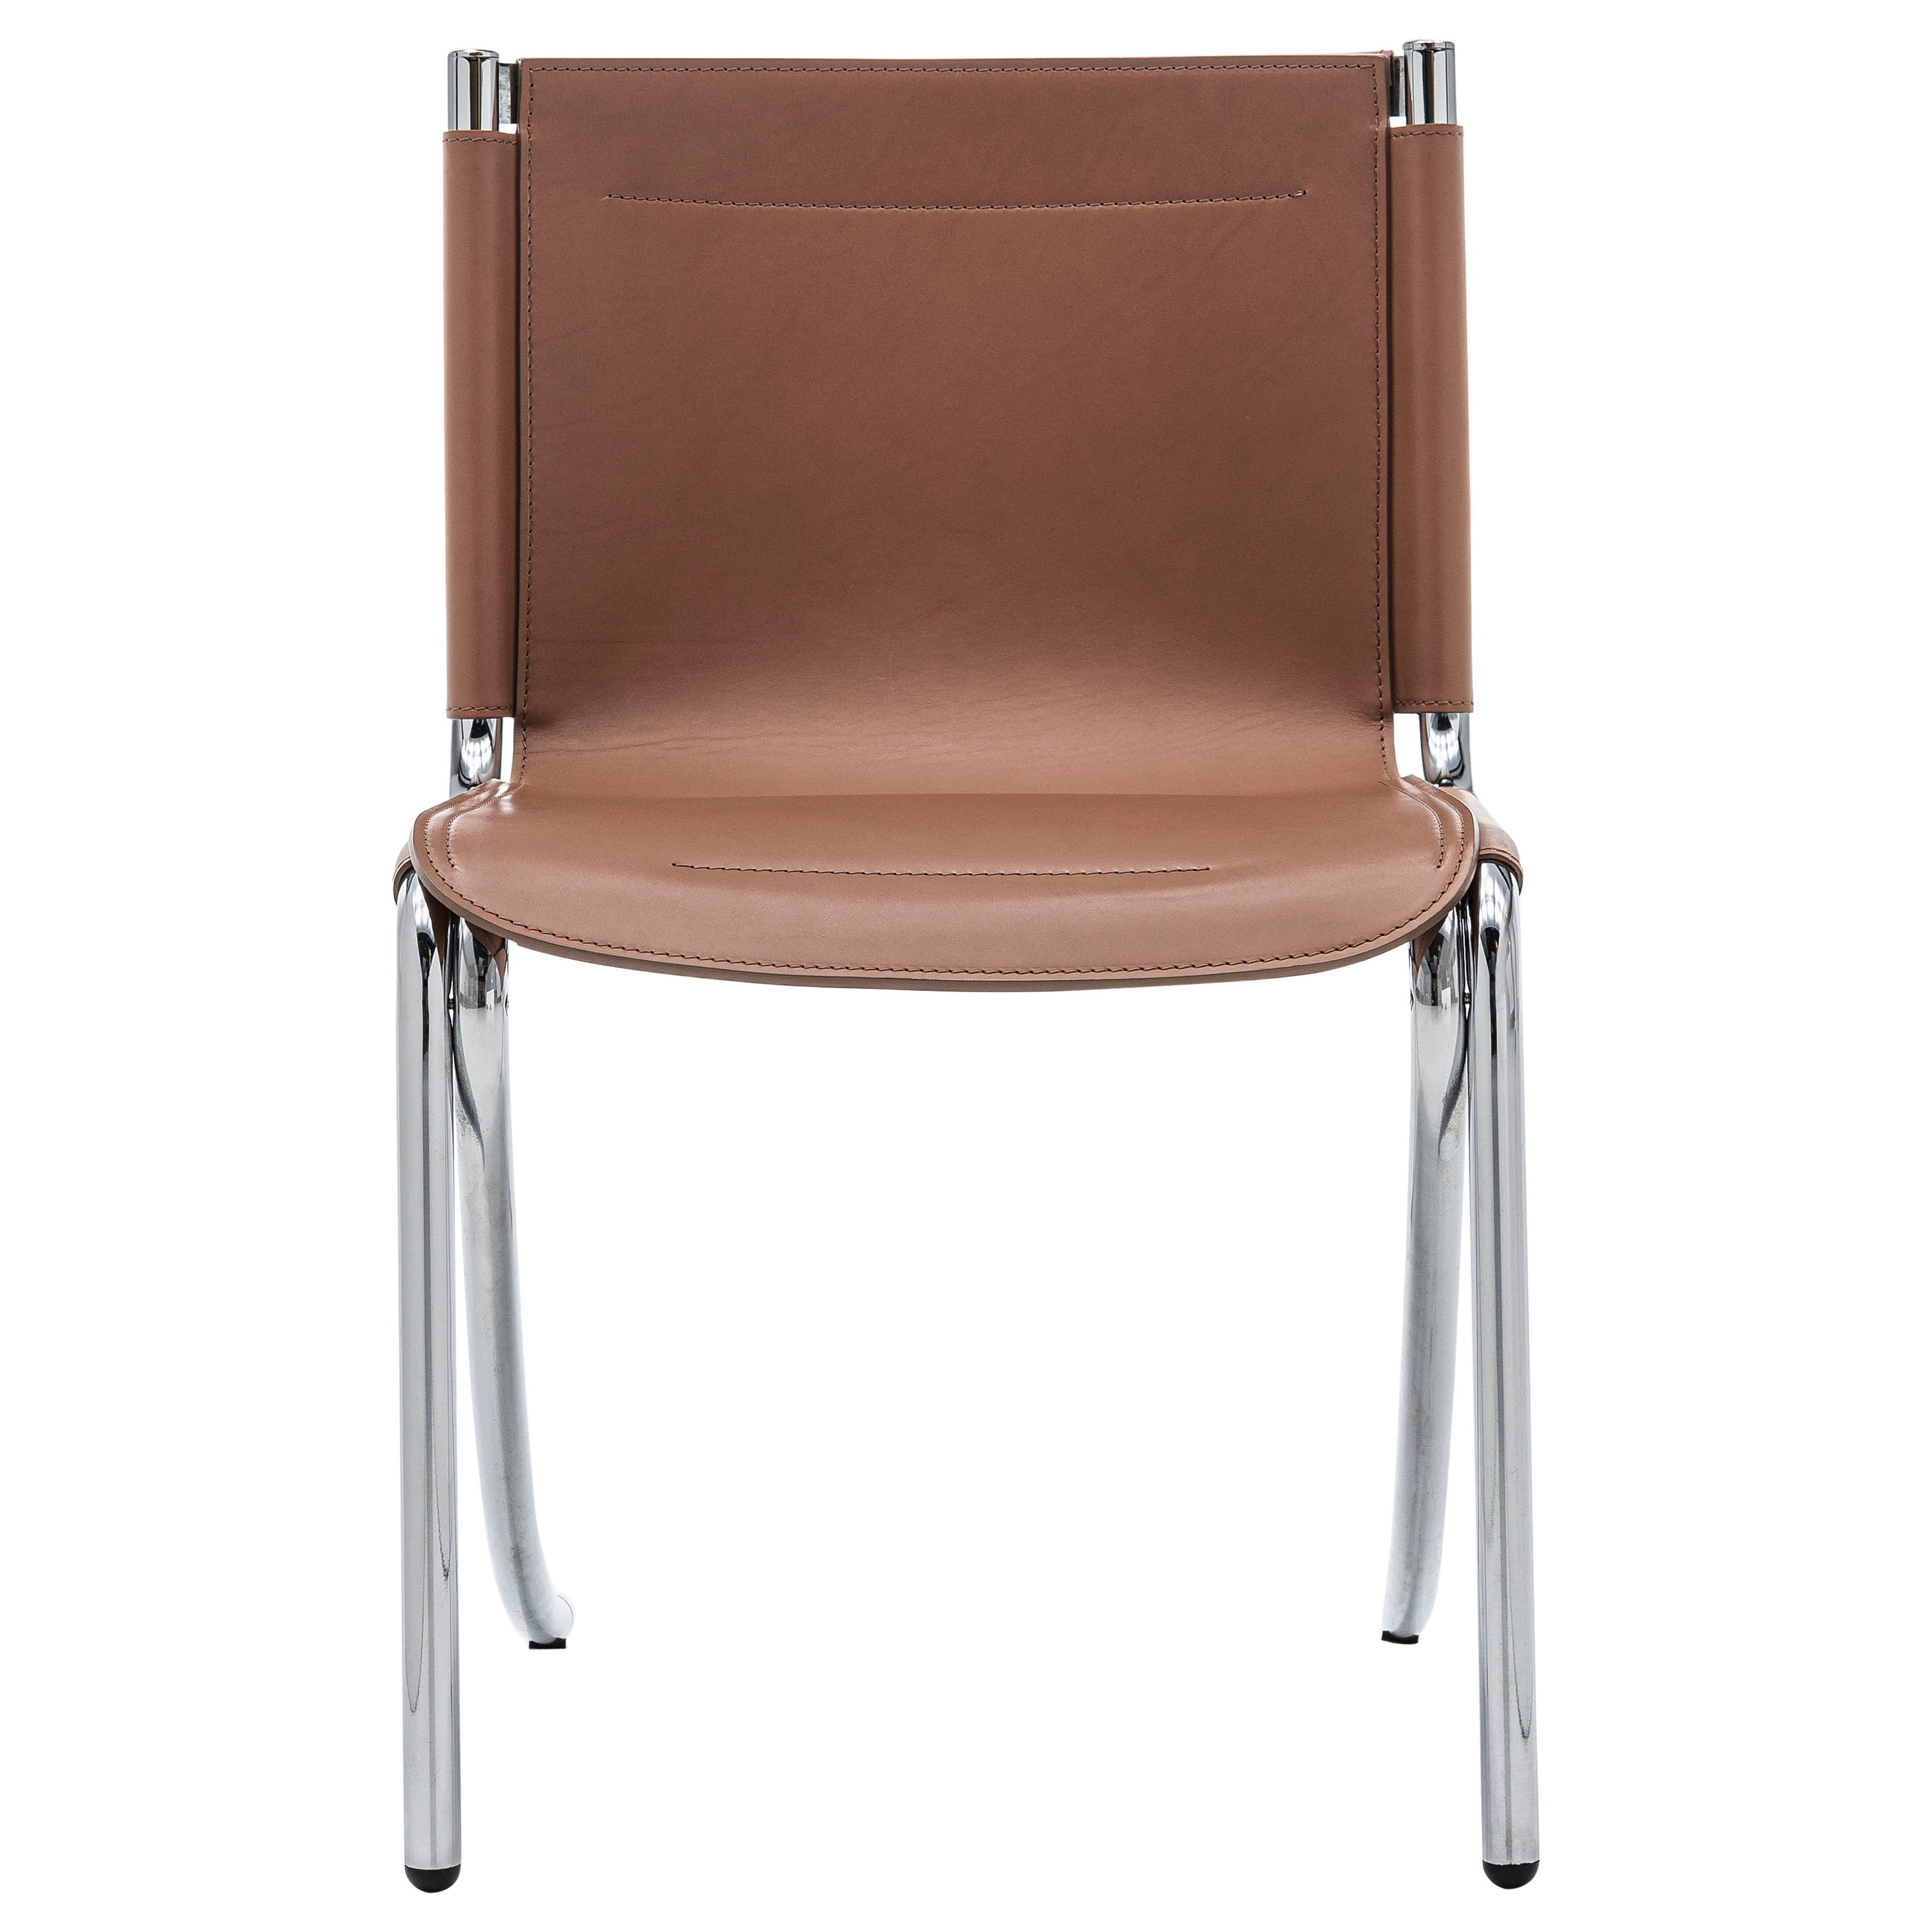 Acerbis Jot Chair in Natural Saddle Seat with Chrome Frame by Giotto Stoppino